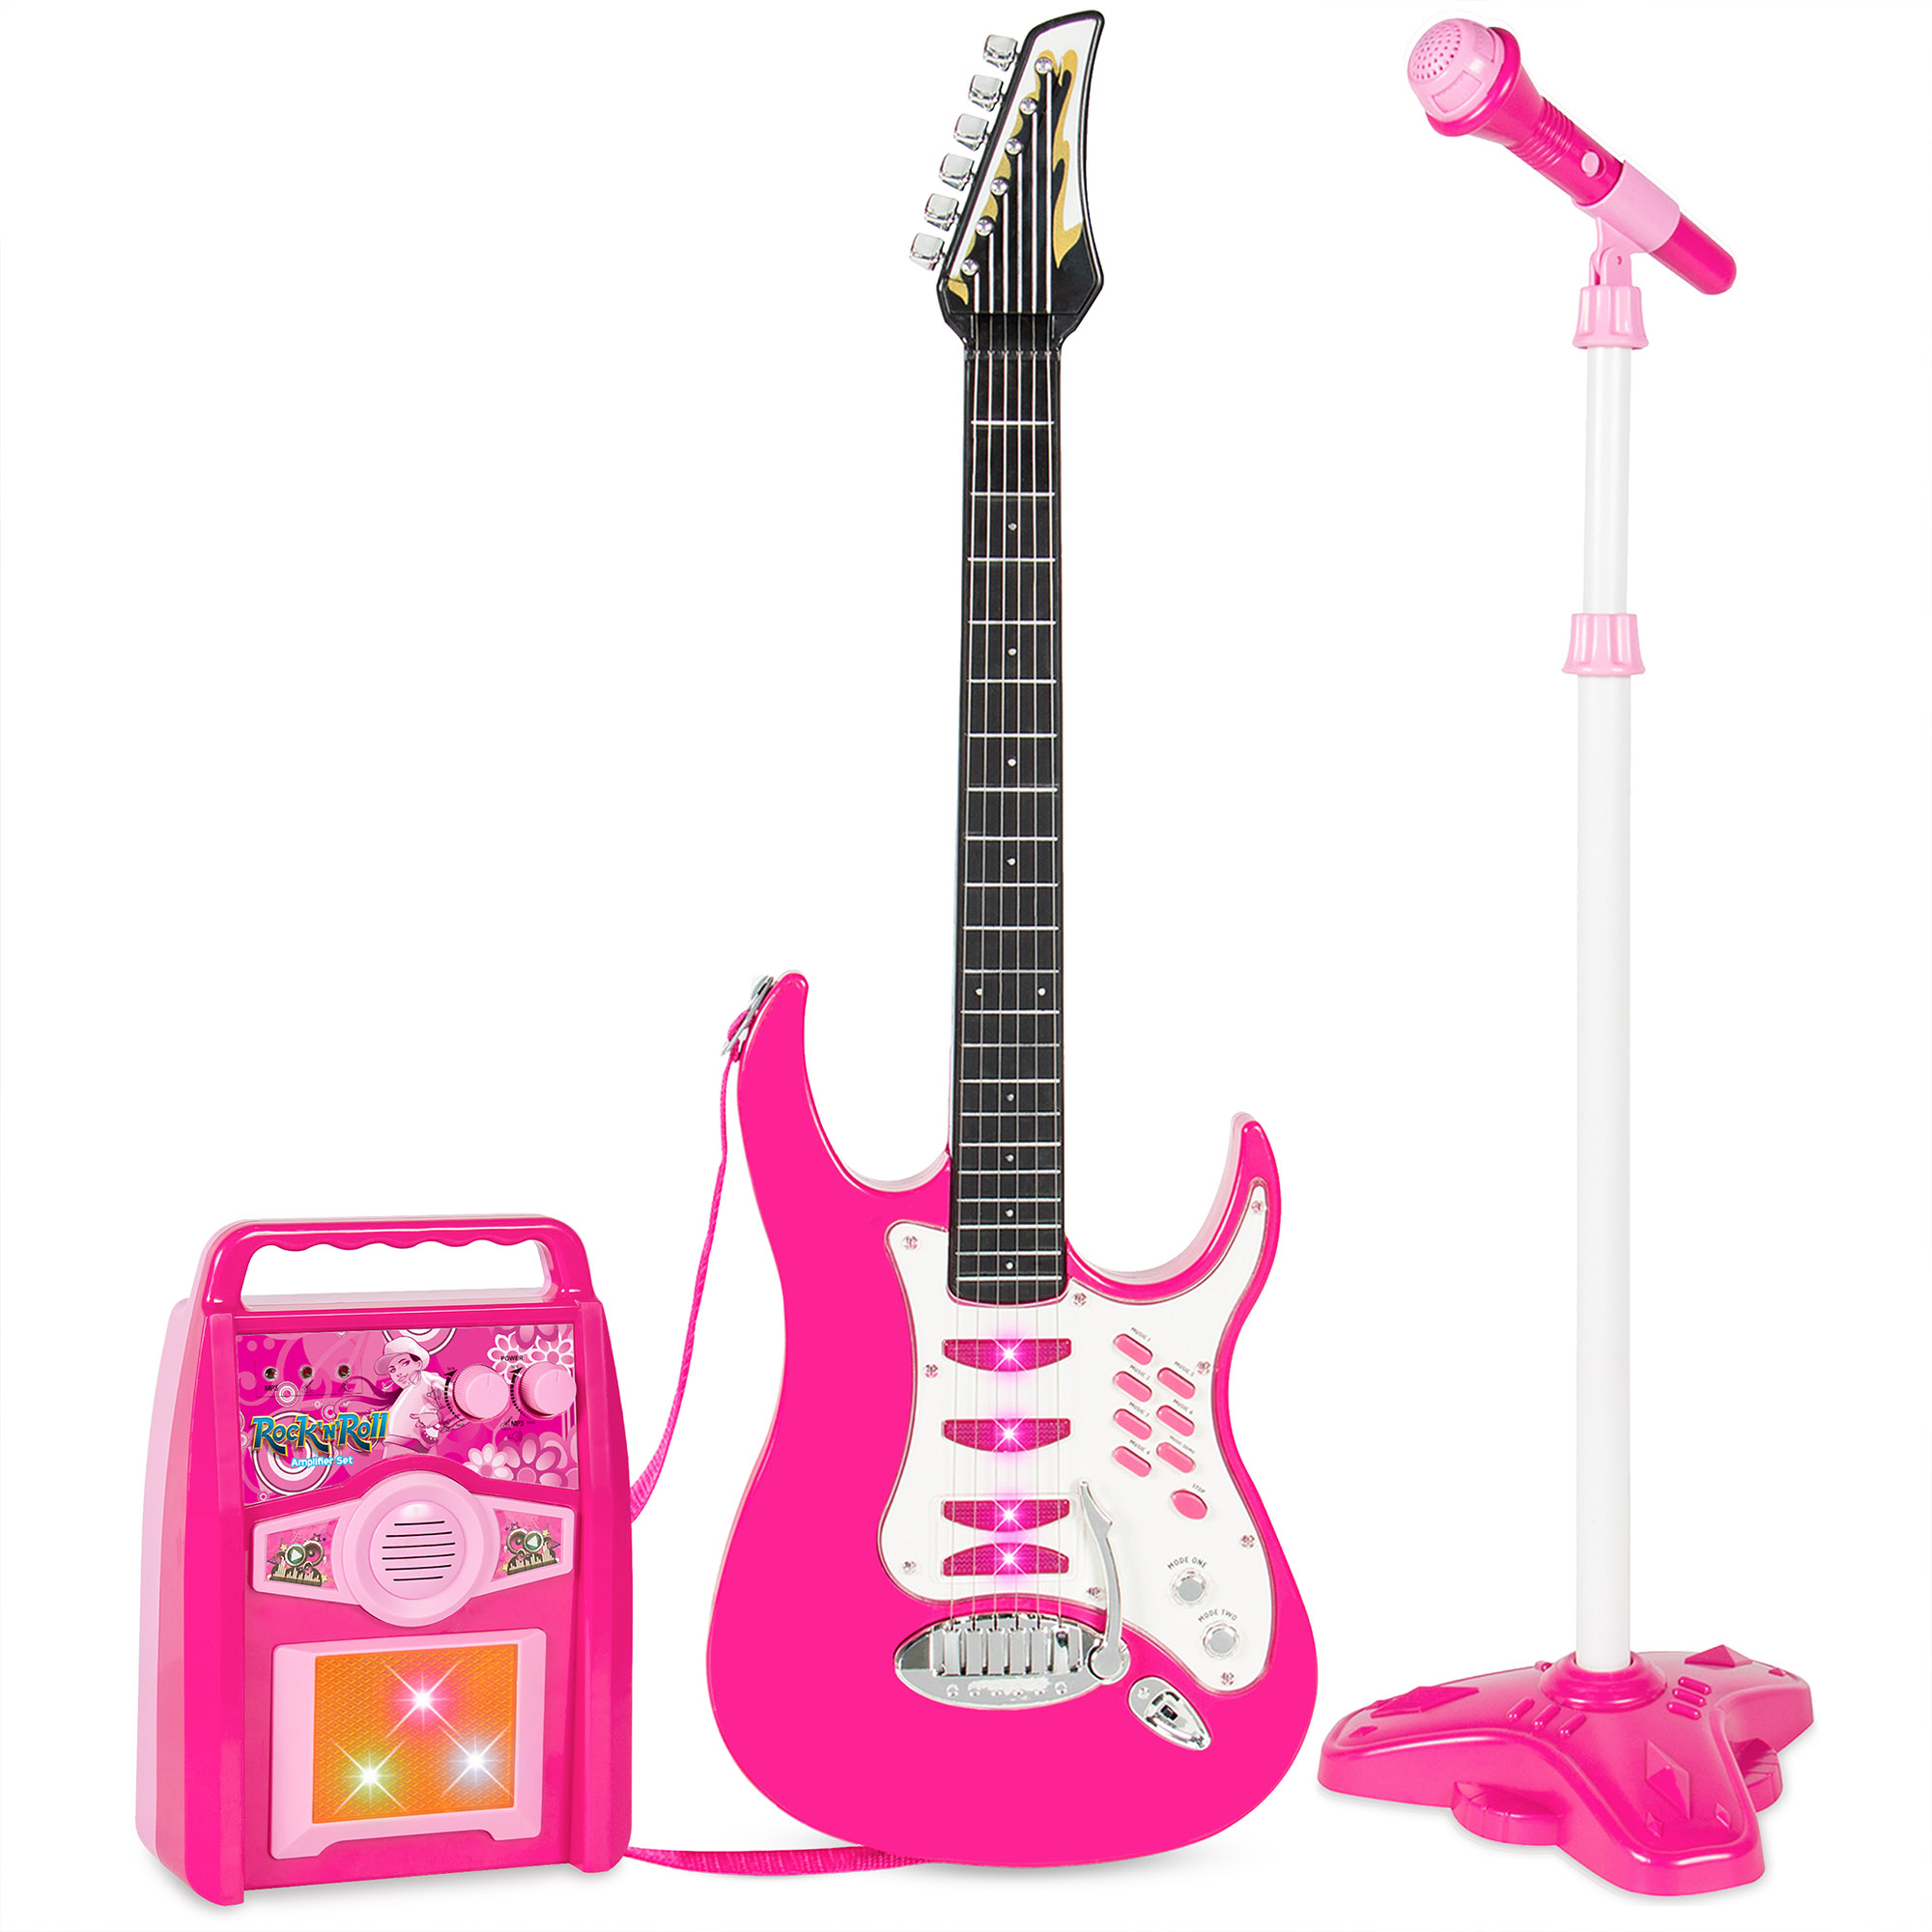 Best Choice Products Kids Electric Musical Guitar Toy Play Set w/ 6 Demo Songs, Whammy Bar, Microphone, Amp, AUX - Pink - image 1 of 7